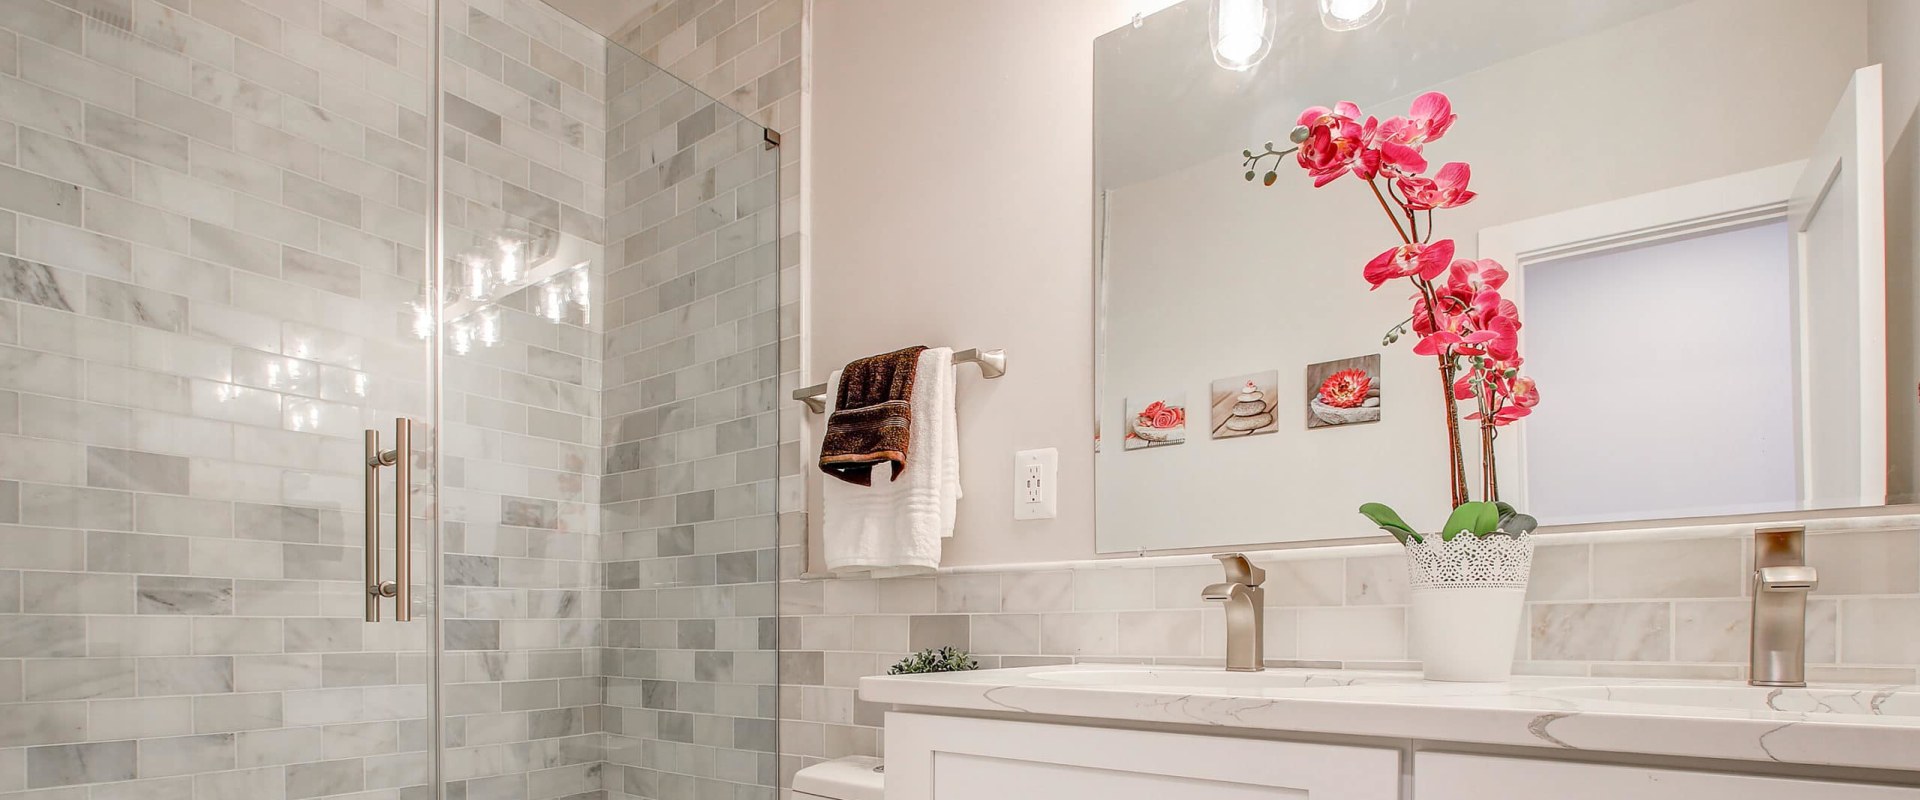 When remodeling a bathroom what should be done first?